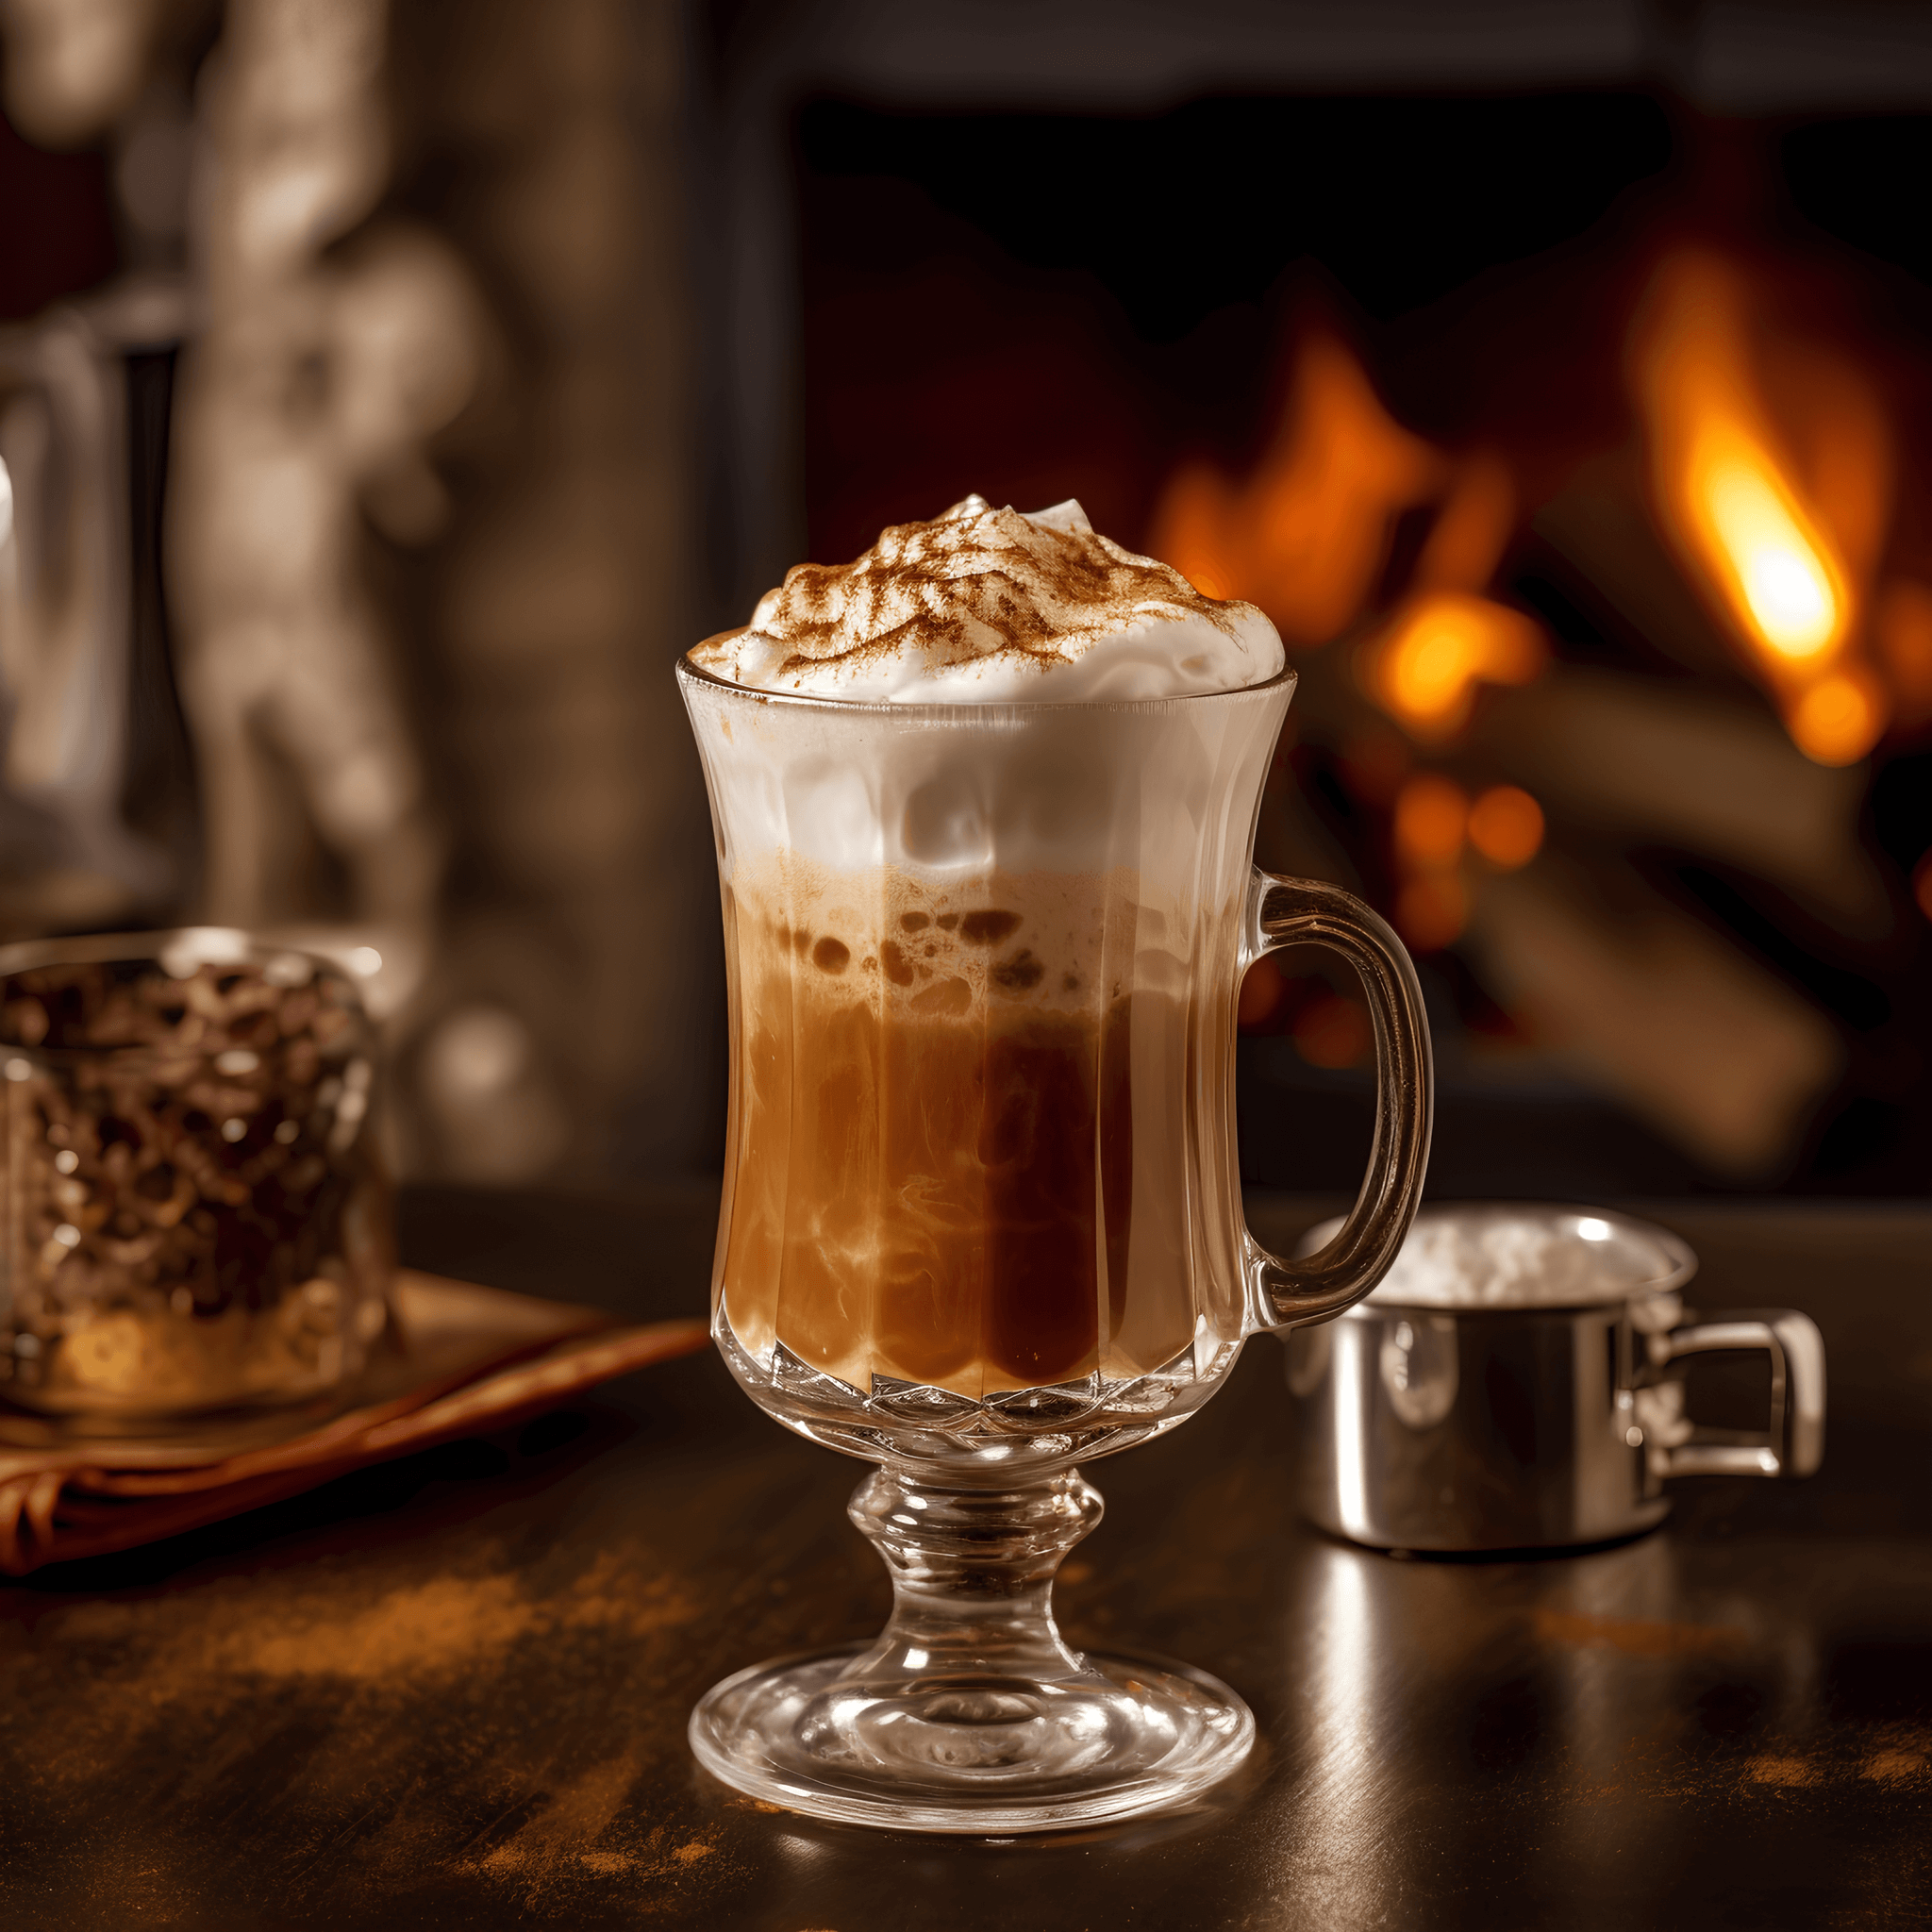 Irish Coffee is a warm, rich, and creamy cocktail with a perfect balance of bitter coffee, sweet sugar, and smooth Irish whiskey. The whipped cream adds a luxurious, velvety texture.